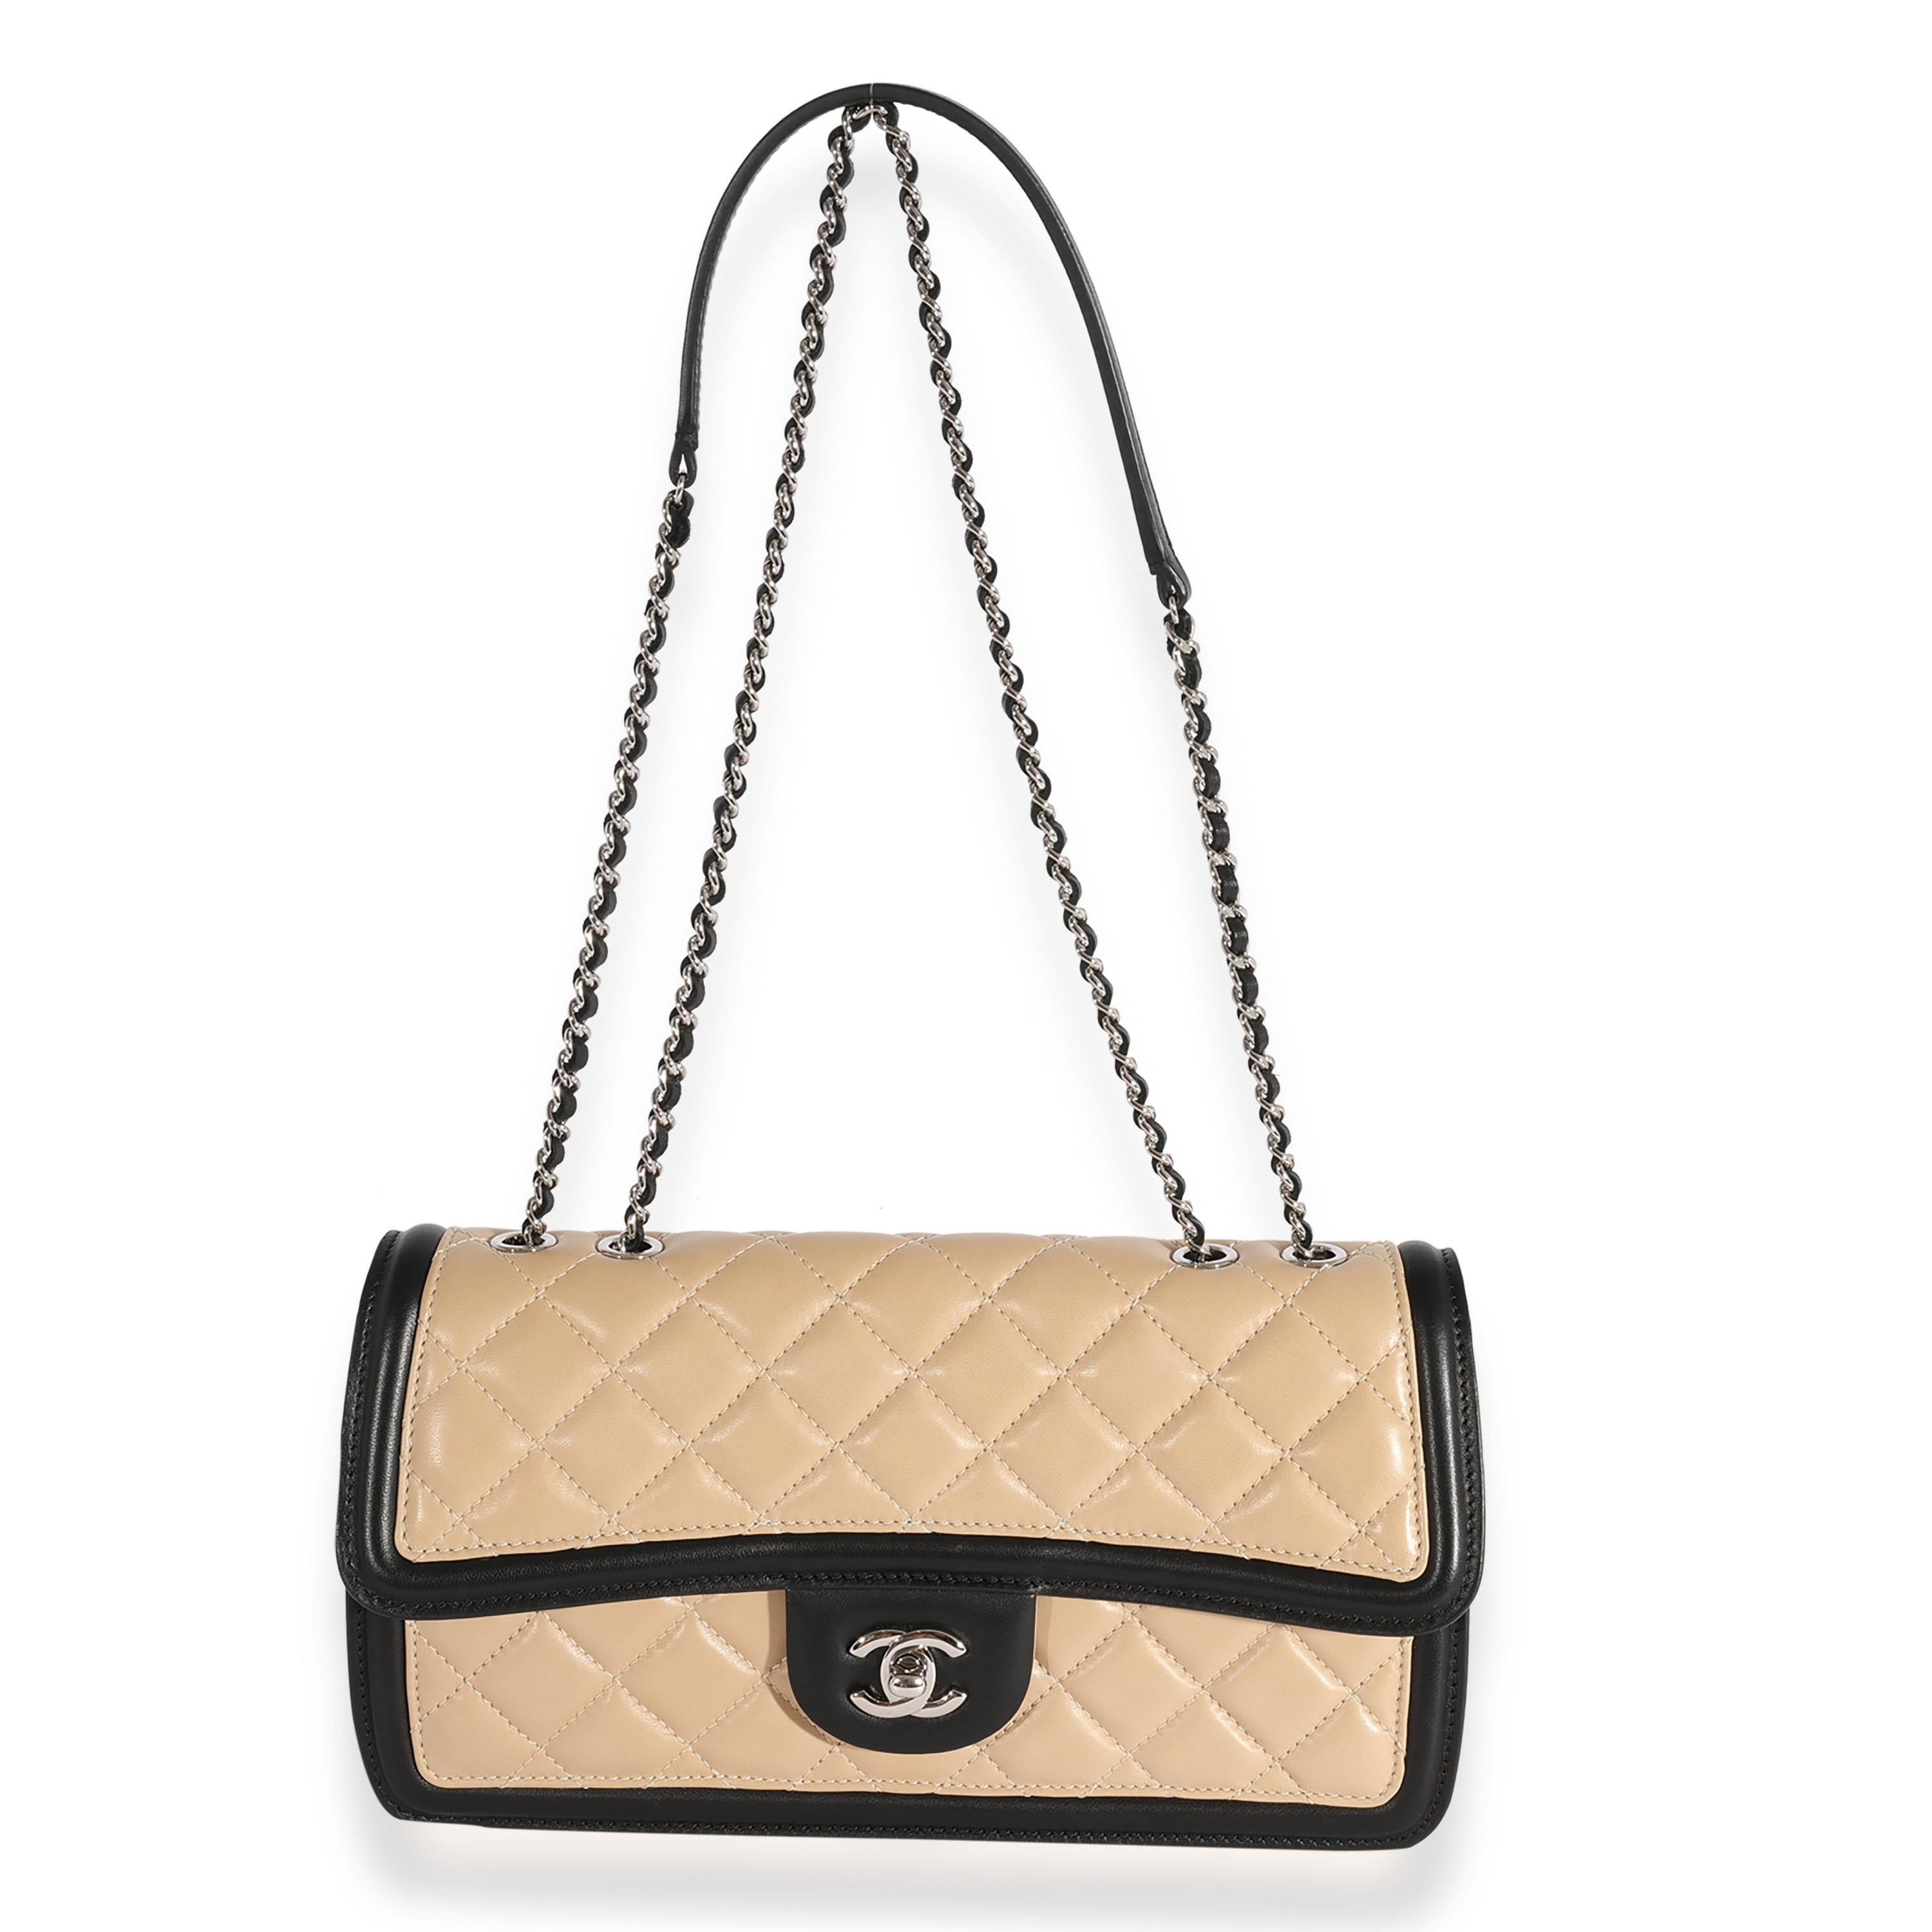 Women's Chanel Tricolor Quilted Lambskin Medium Graphic Flap Bag